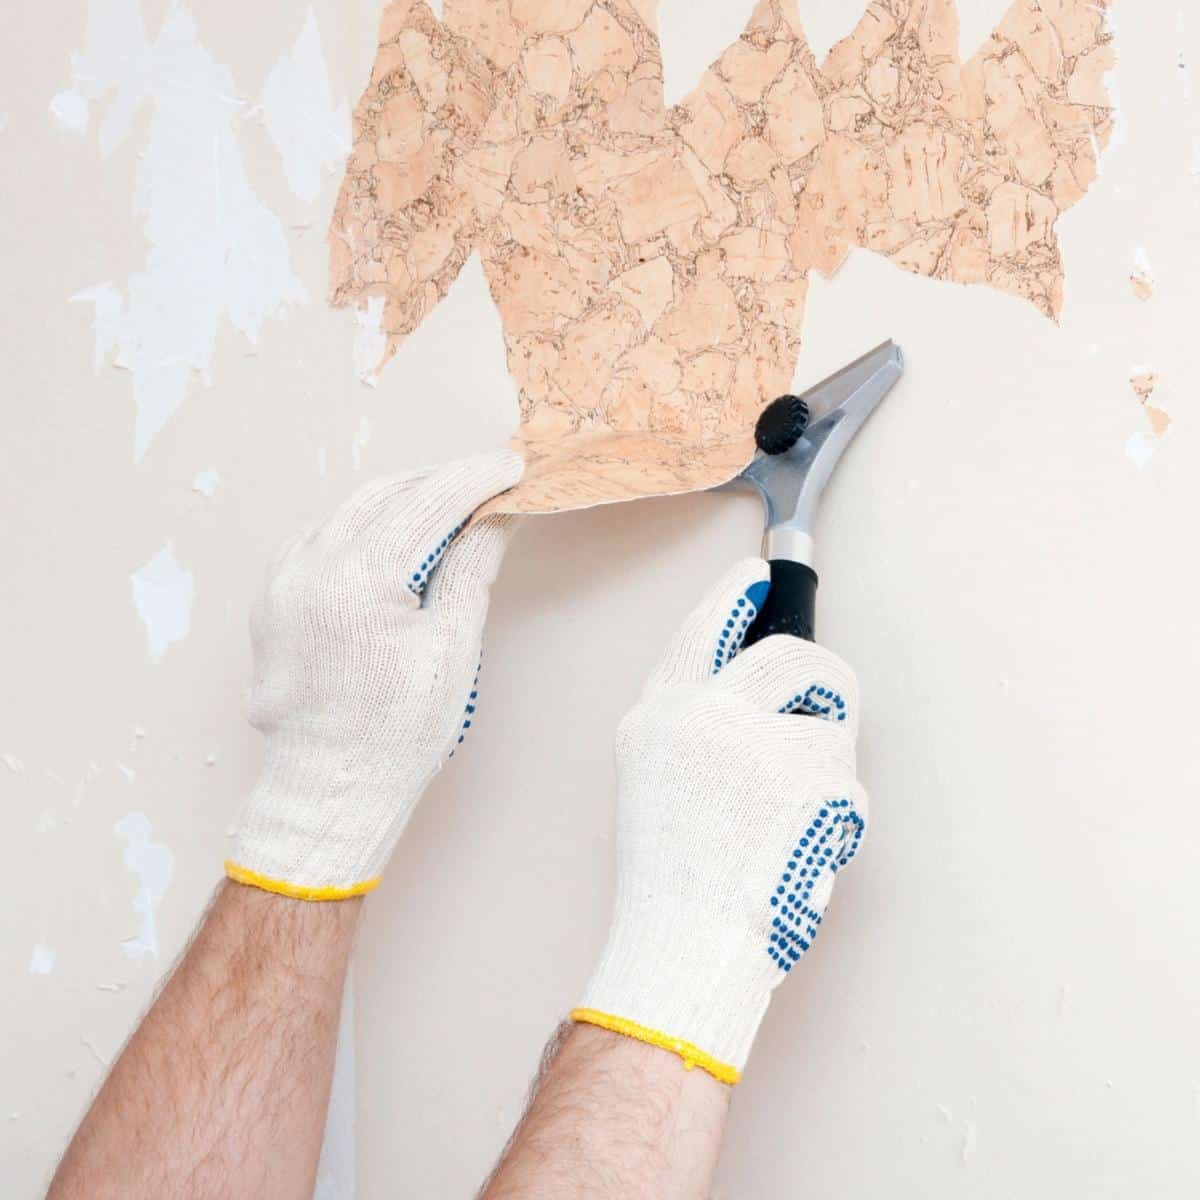 using a scraping tool to remove wallpaper